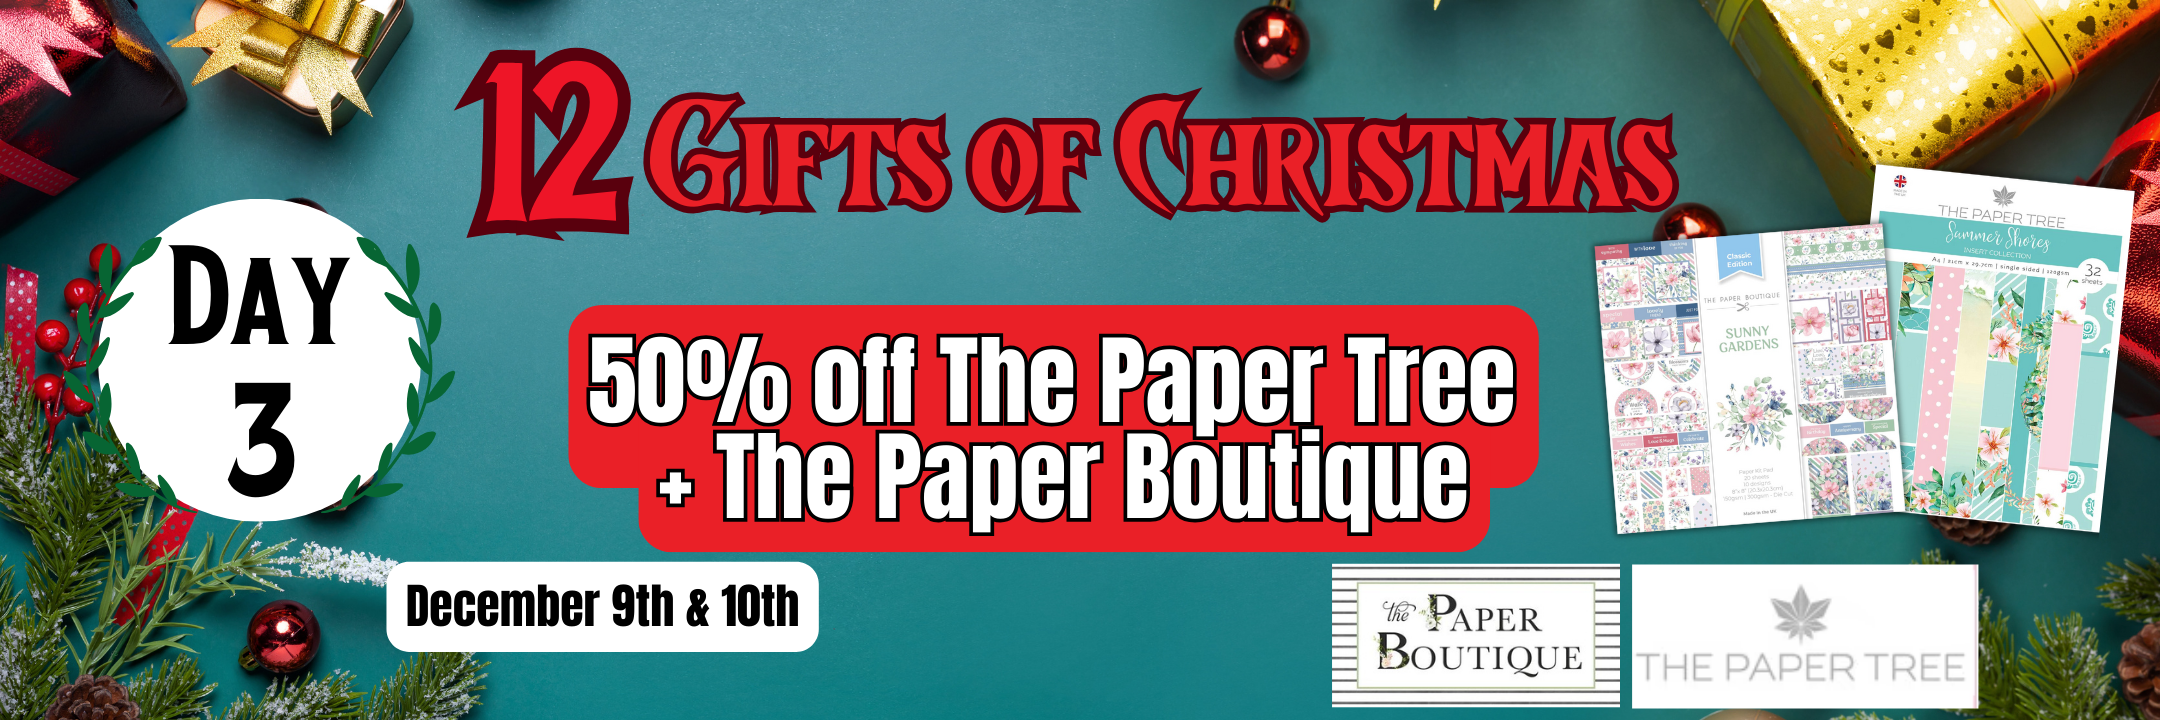 12 Gifts Of Christmas -- Day 3 -- The Paper Tree & The Paper Boutique